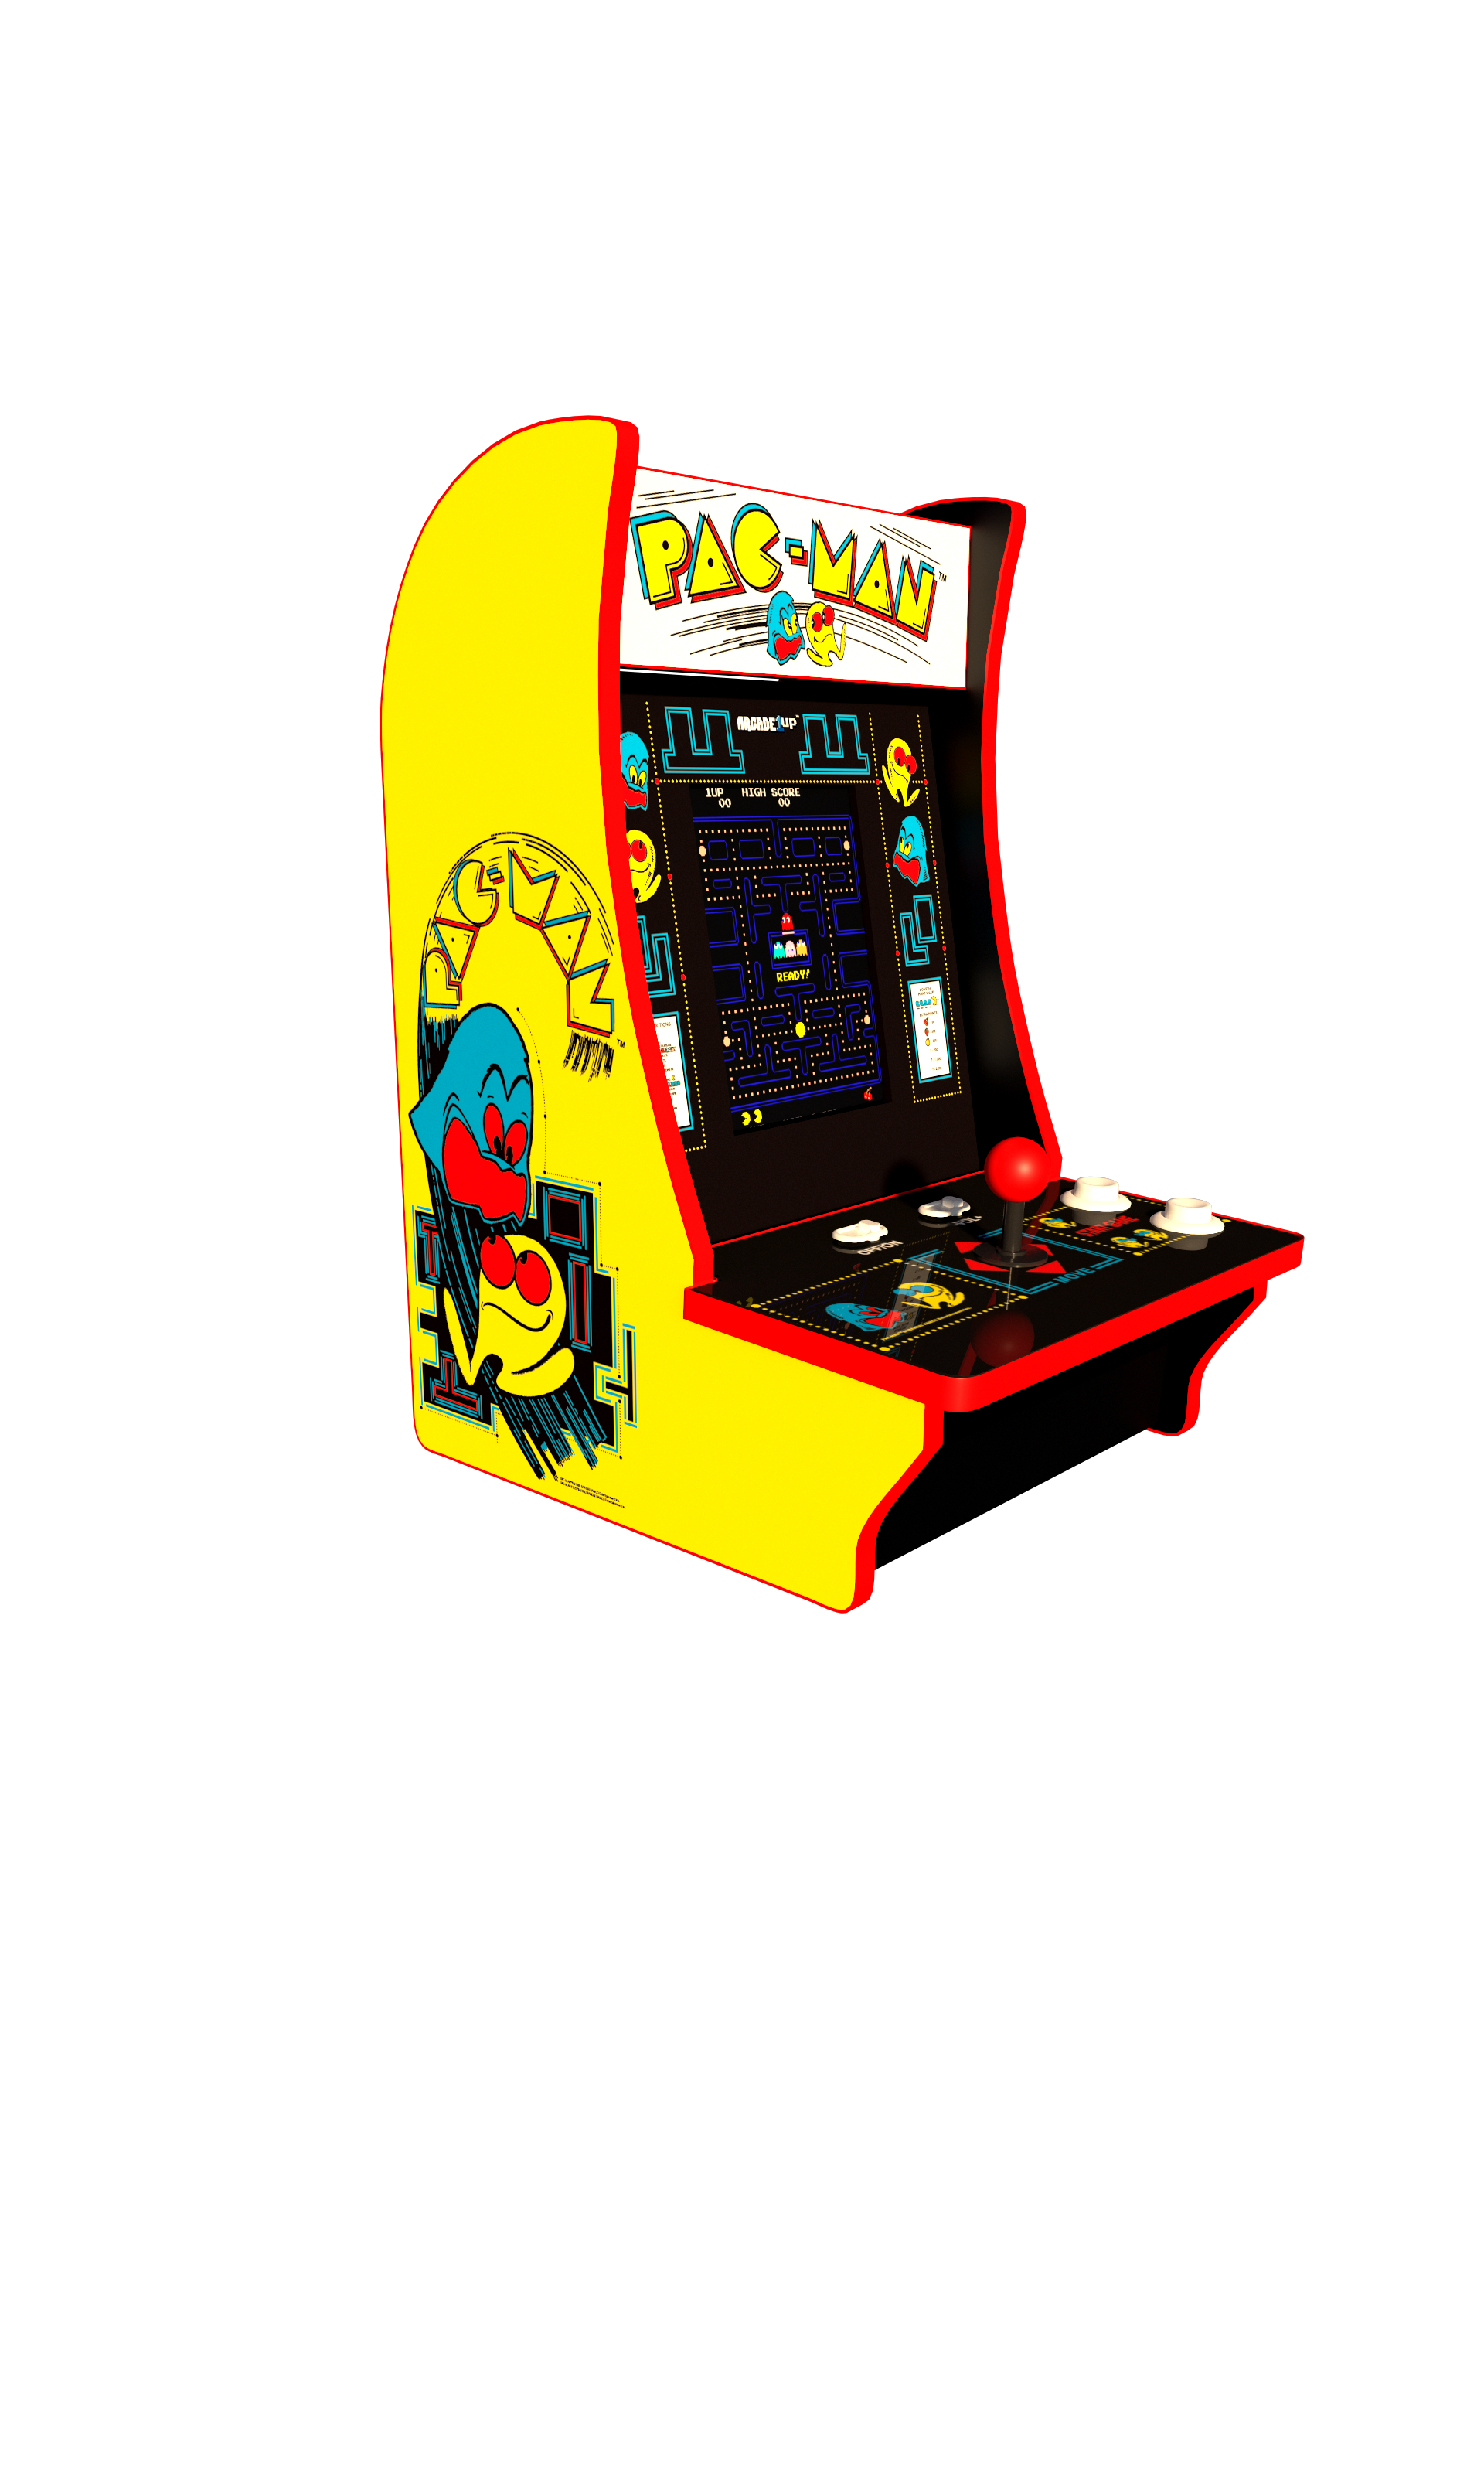 Pac-Man and Pac & Pal Counter Arcade Machine, Arcade1UP - image 5 of 10